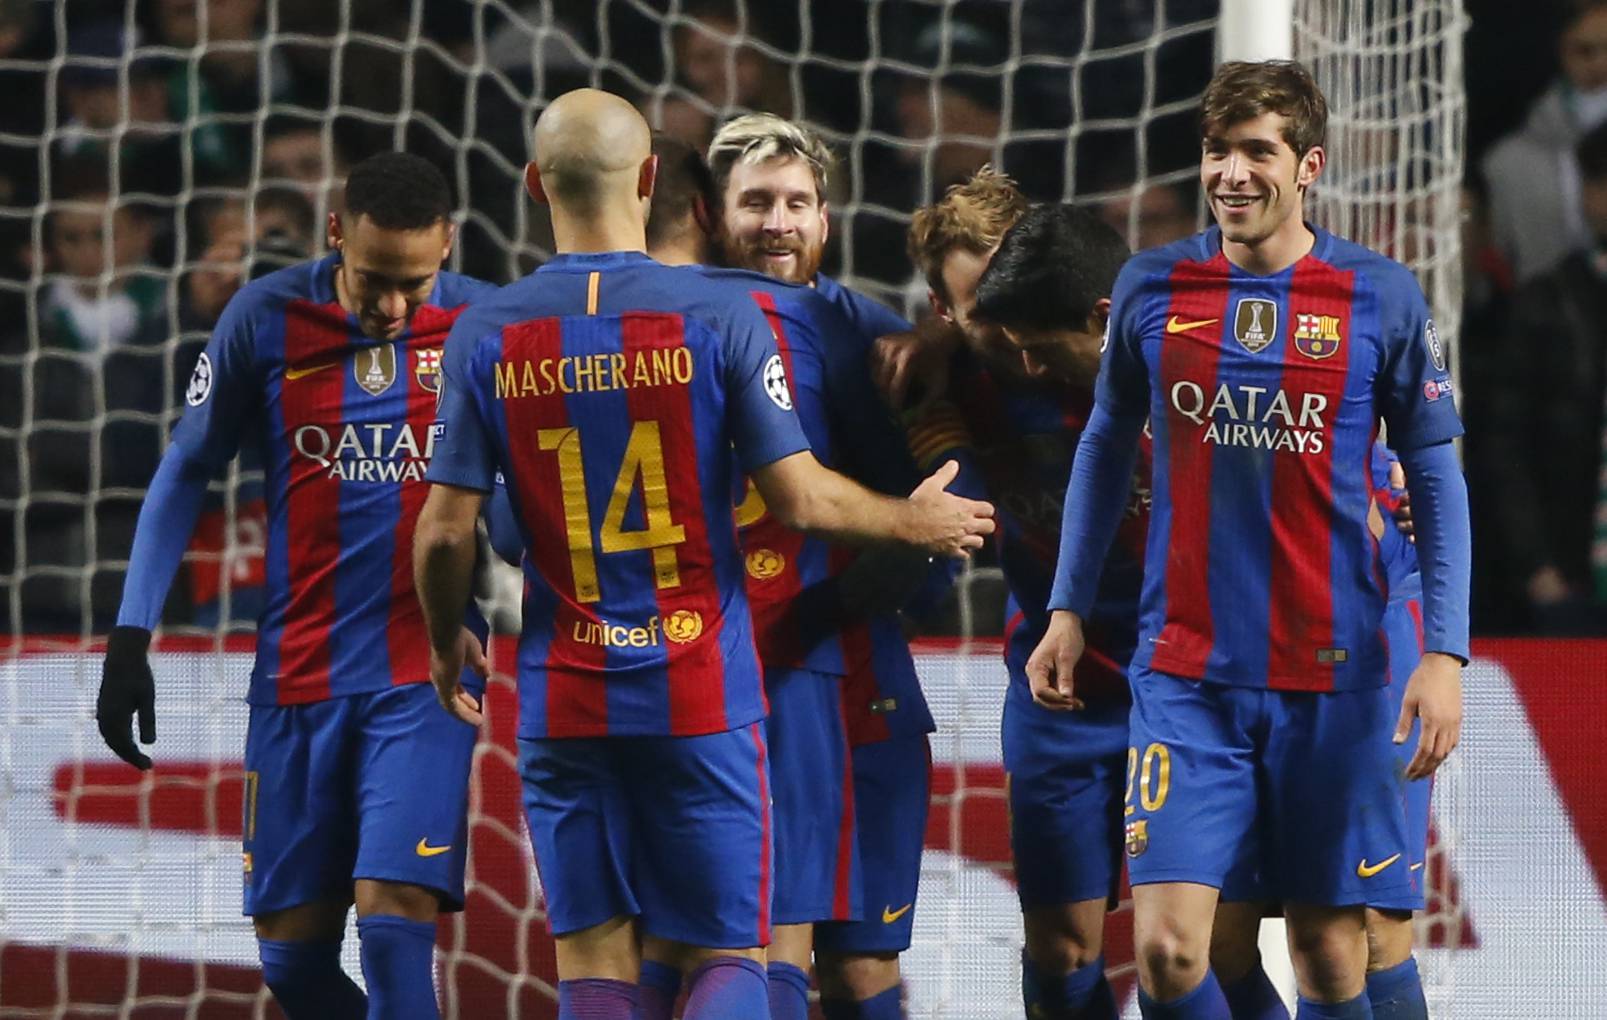 Barcelona's Lionel Messi celebrates scoring their second goal with team mates